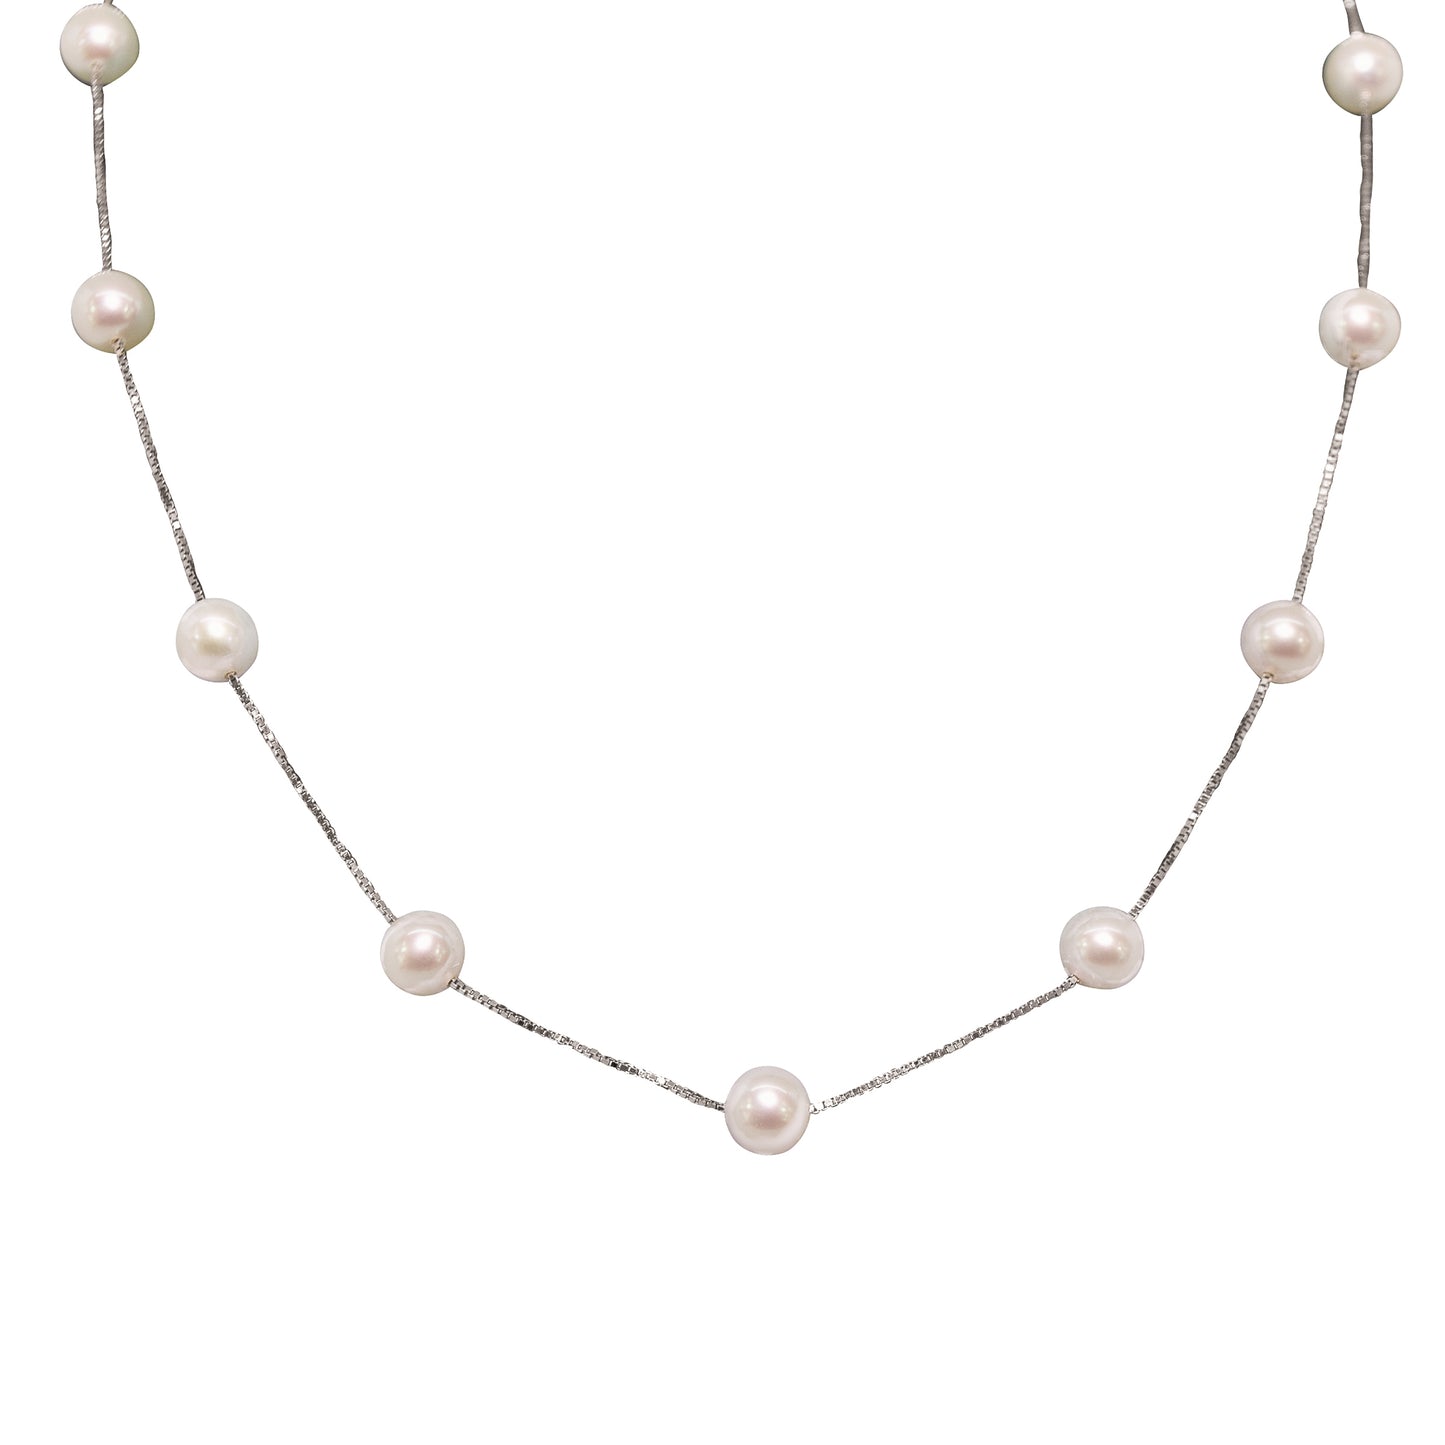 Garland of Luminous Pearls Silver Necklace